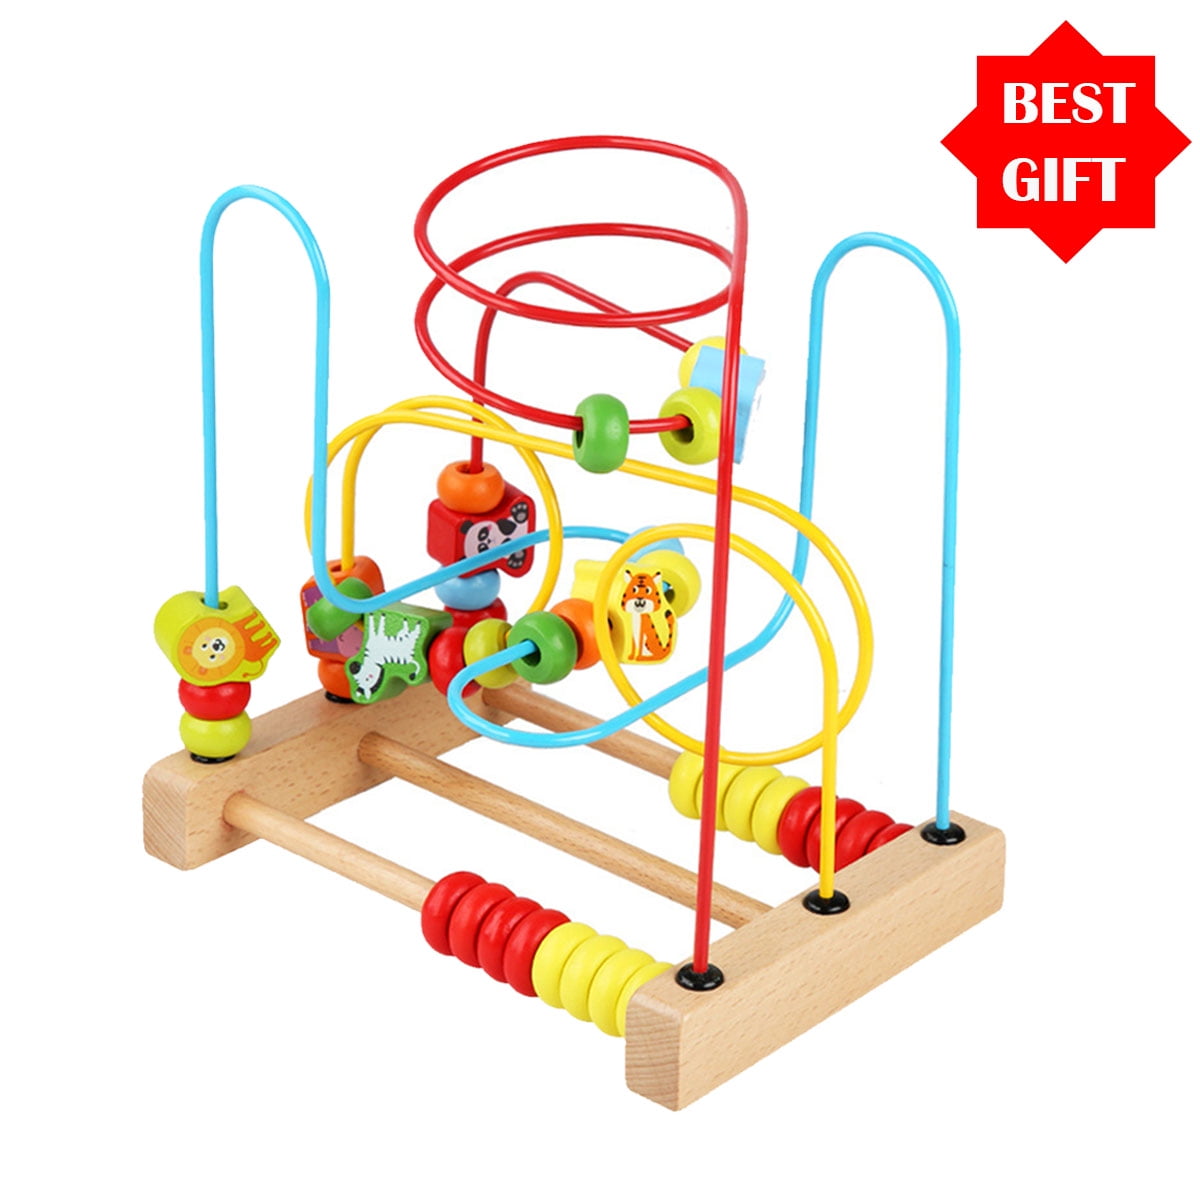 Wooden Toys Beads Maze Roller Coaster Educational Toys for Toddlers Baby Around Circle Bead Skill Improvement Wood Toys Birthday Gift for Boys & Girls